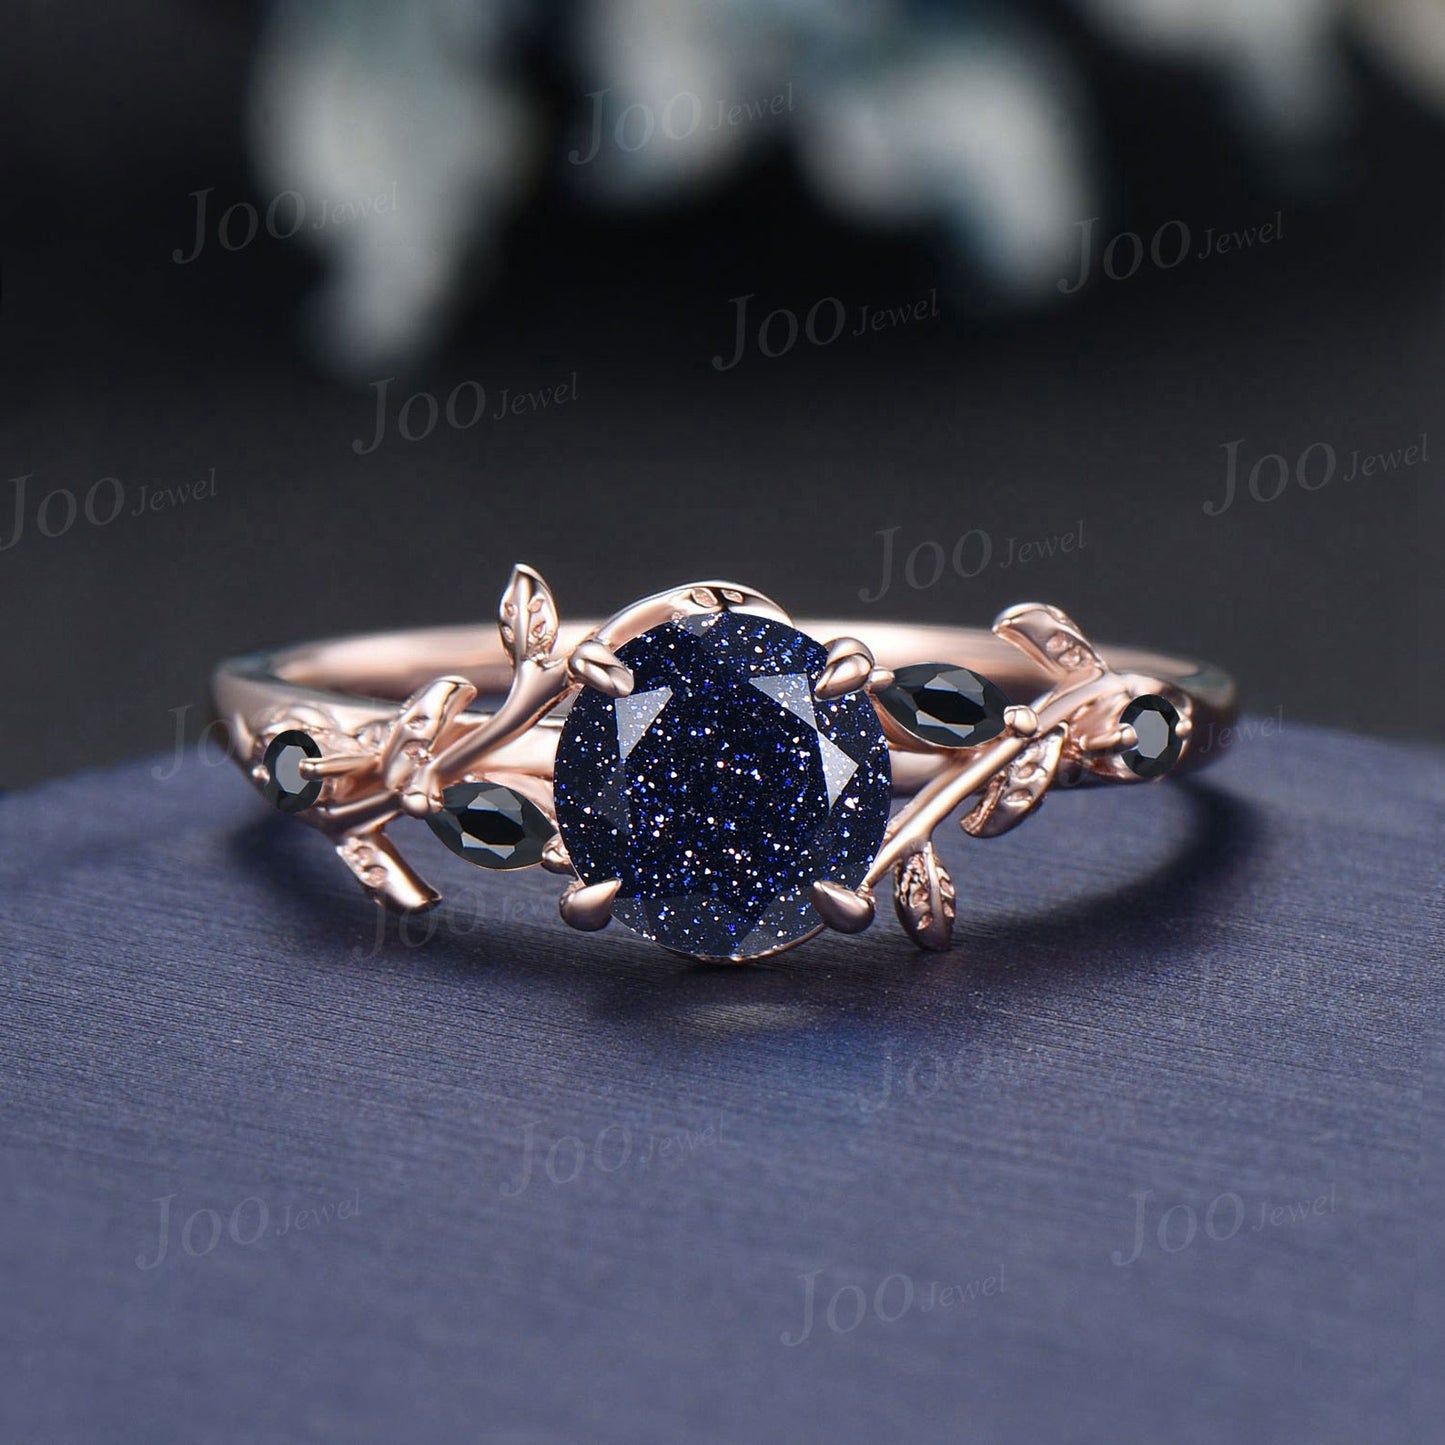 1ct Nature Inspired Round Galaxy Blue Sandstone Engagement Ring Cluster Moonstone Ring Blue Goldstone Ring Anniversary/Promise Gift Women